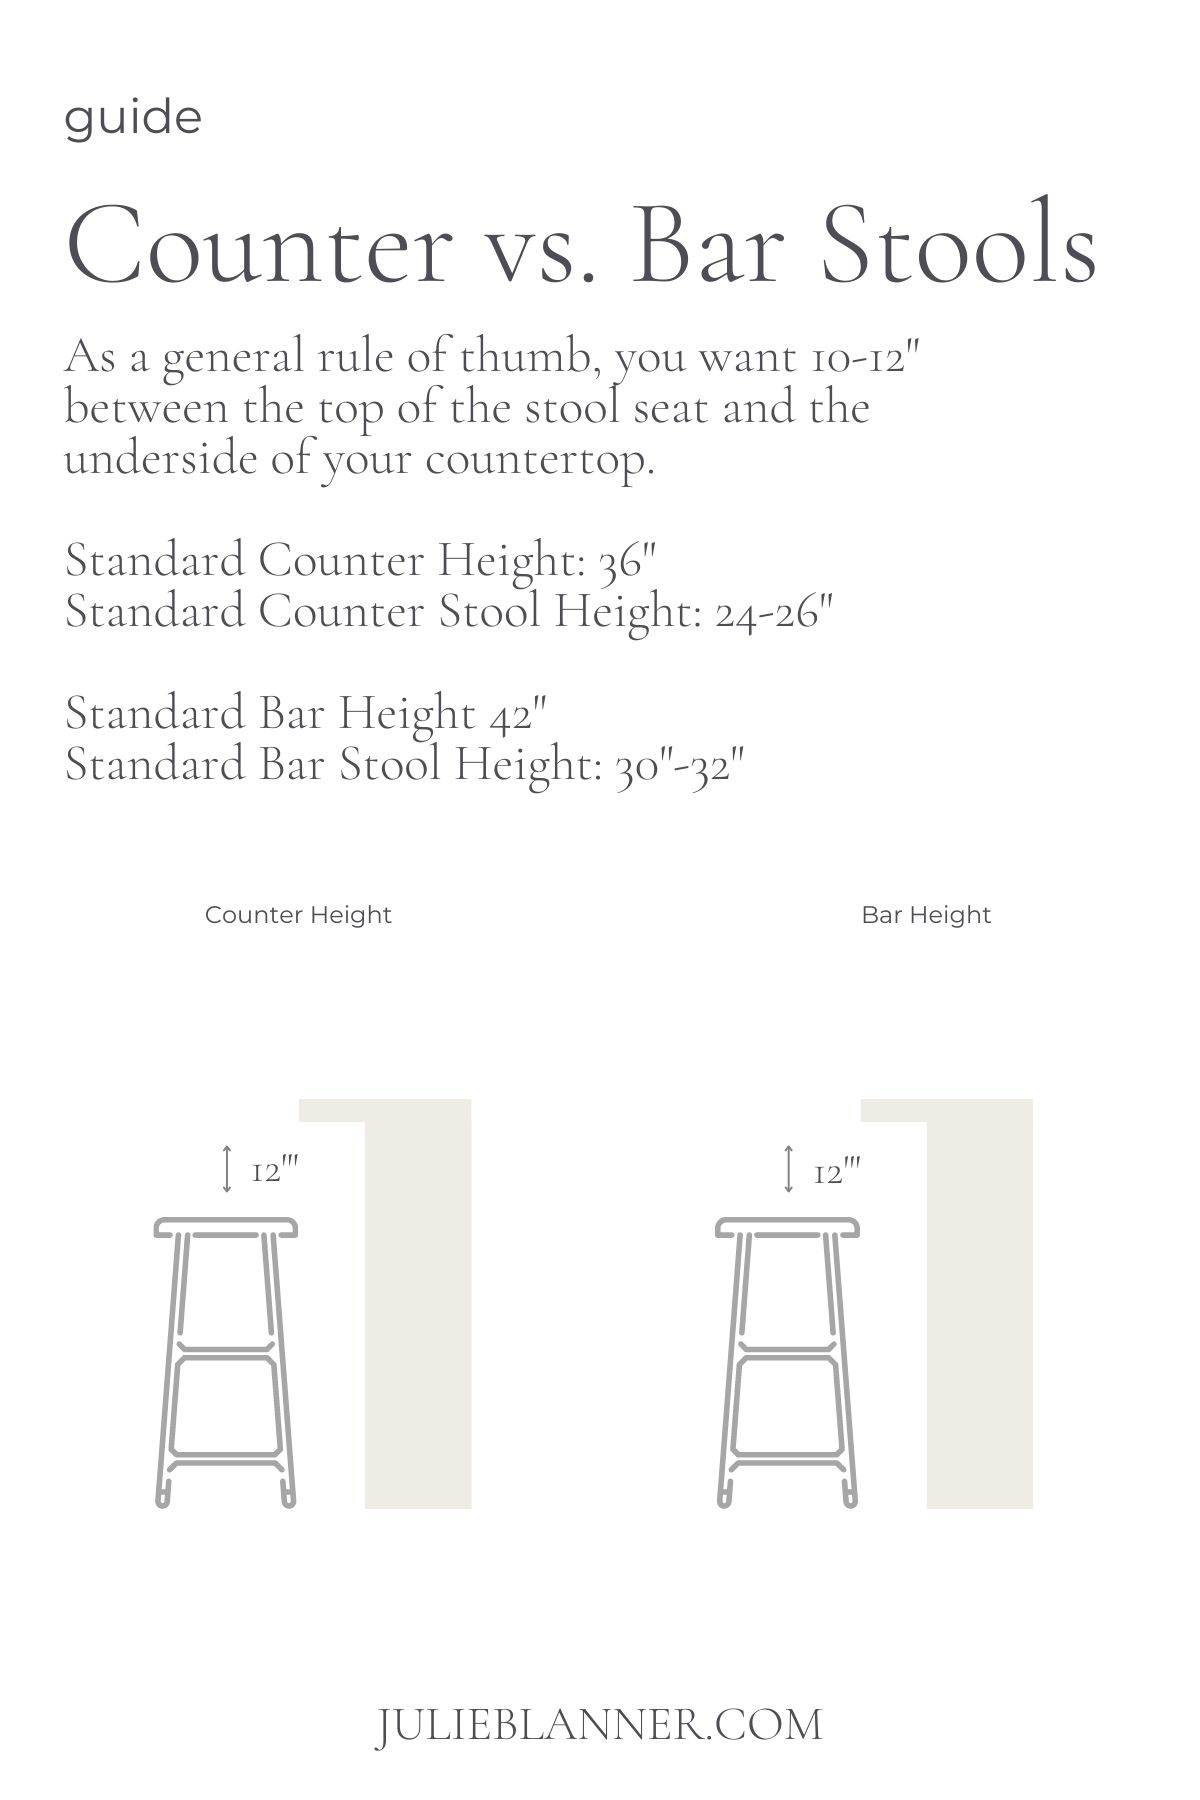 A graphic describing the differing measurements between counter stools and bar stools